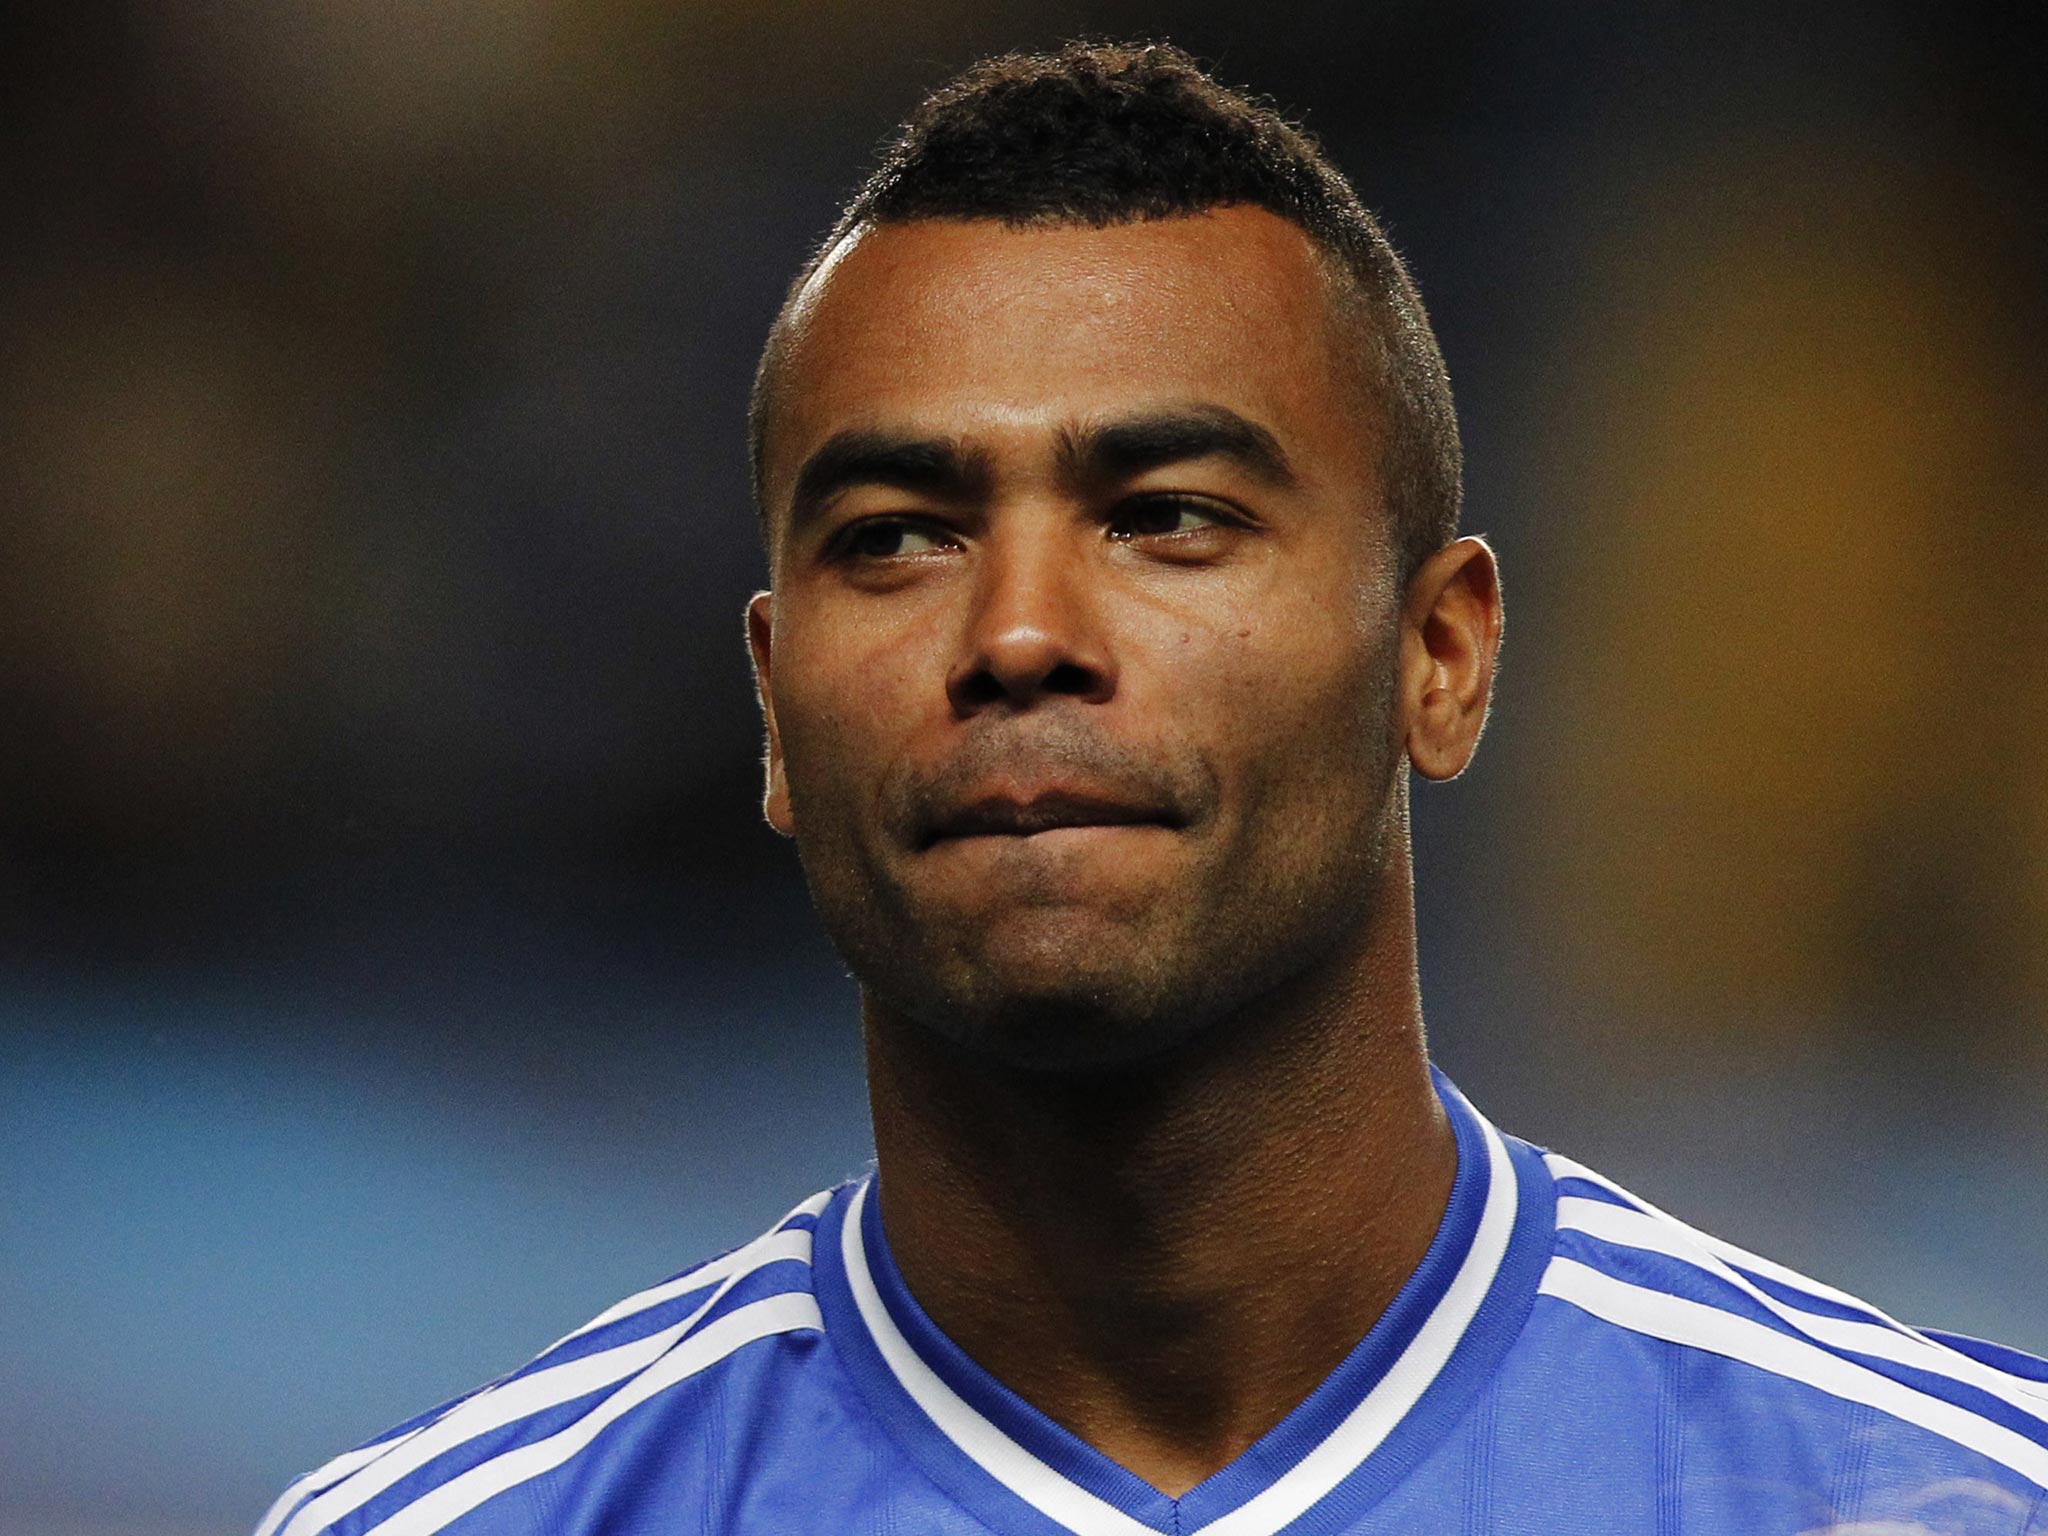 Ashley Cole was in the same youth team as Weston at Arsenal and is one of the few in the side still playing